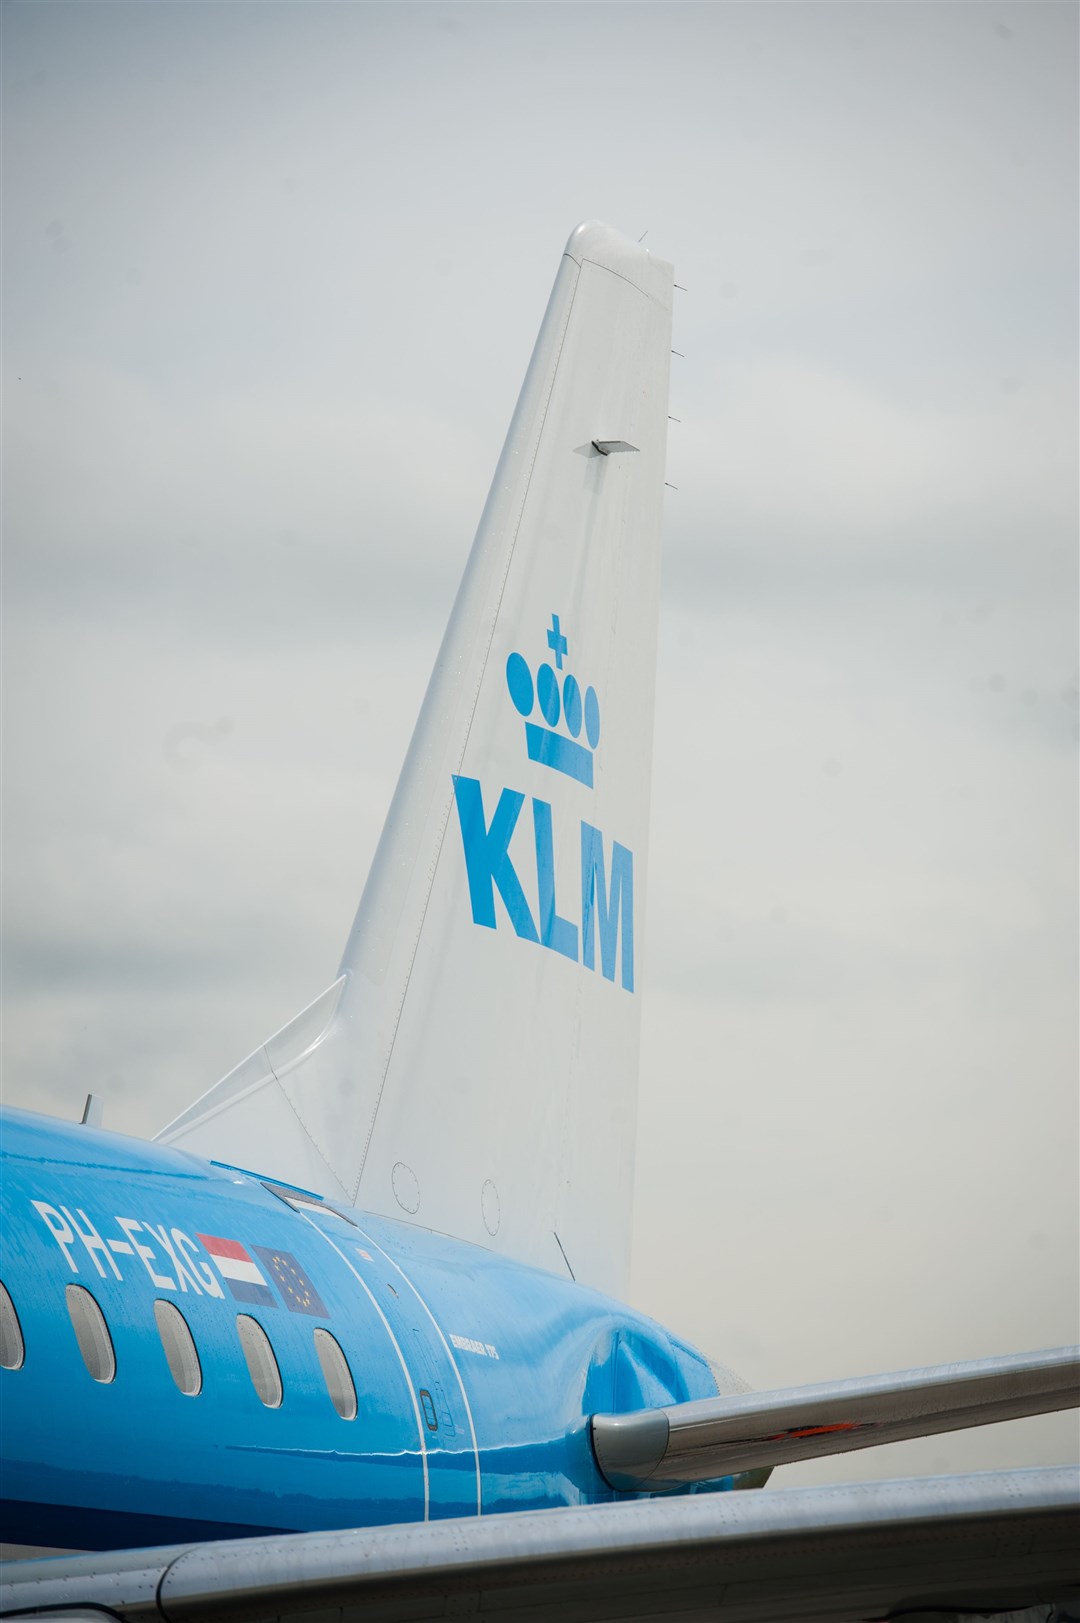 KLM is cancelling its Inverness to Amsterdam service until next year.